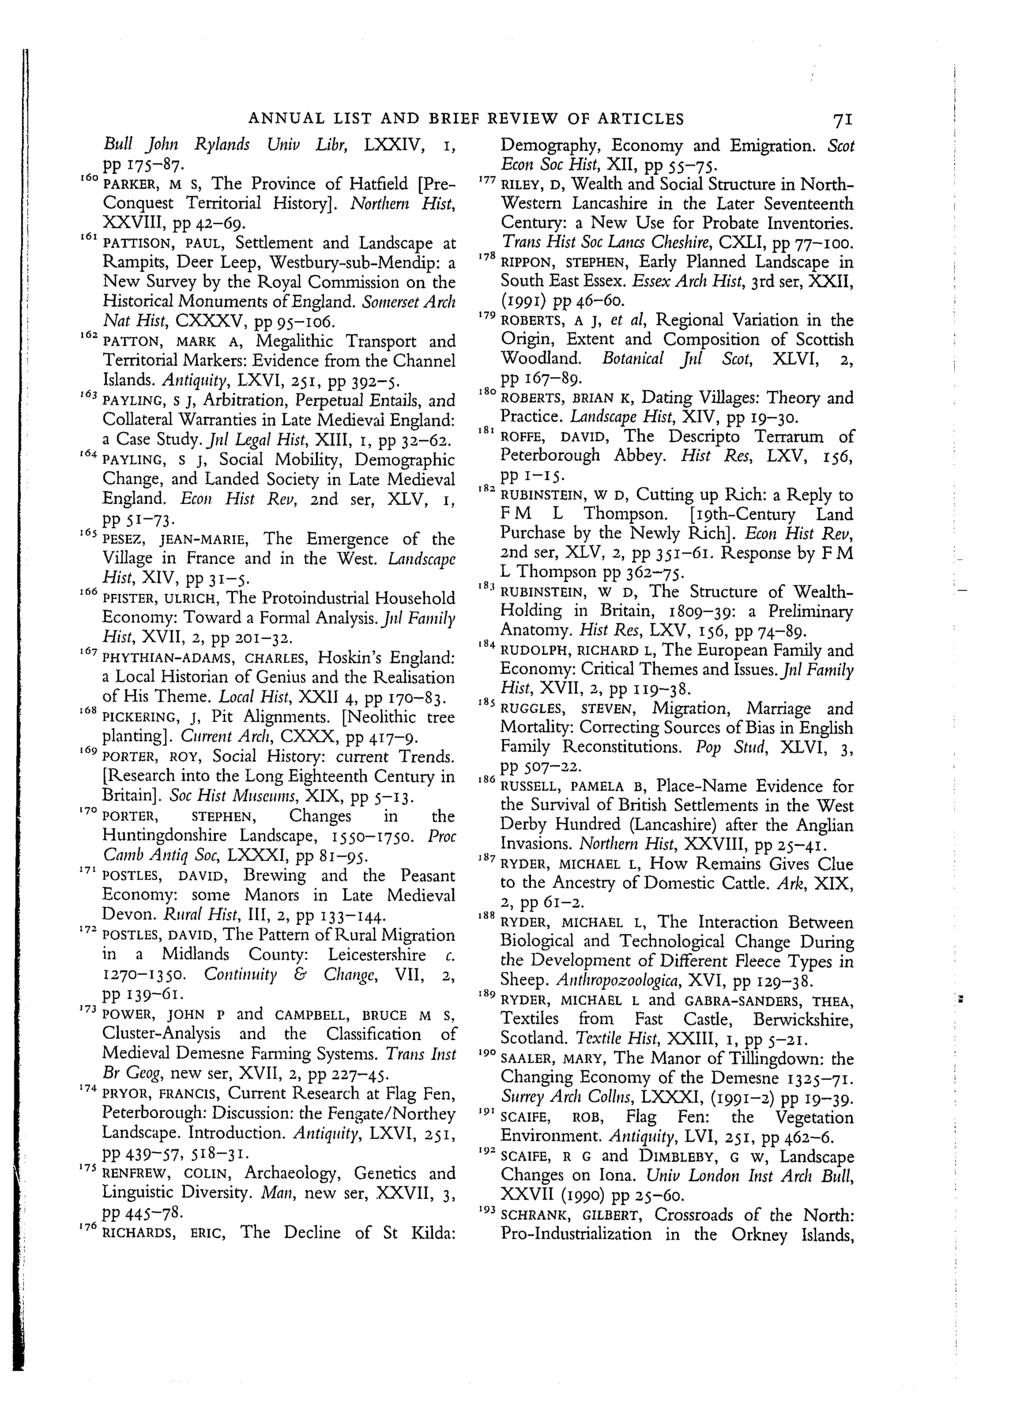 ANNUAL LIST AND BRIEF REVIEW OF ARTICLES Bull John Rylands Univ Libr, LXXIV, I, pp 175-87. I60 VARKER, M S, The Province of Hatfield [Pre- Conquest Territorial History].